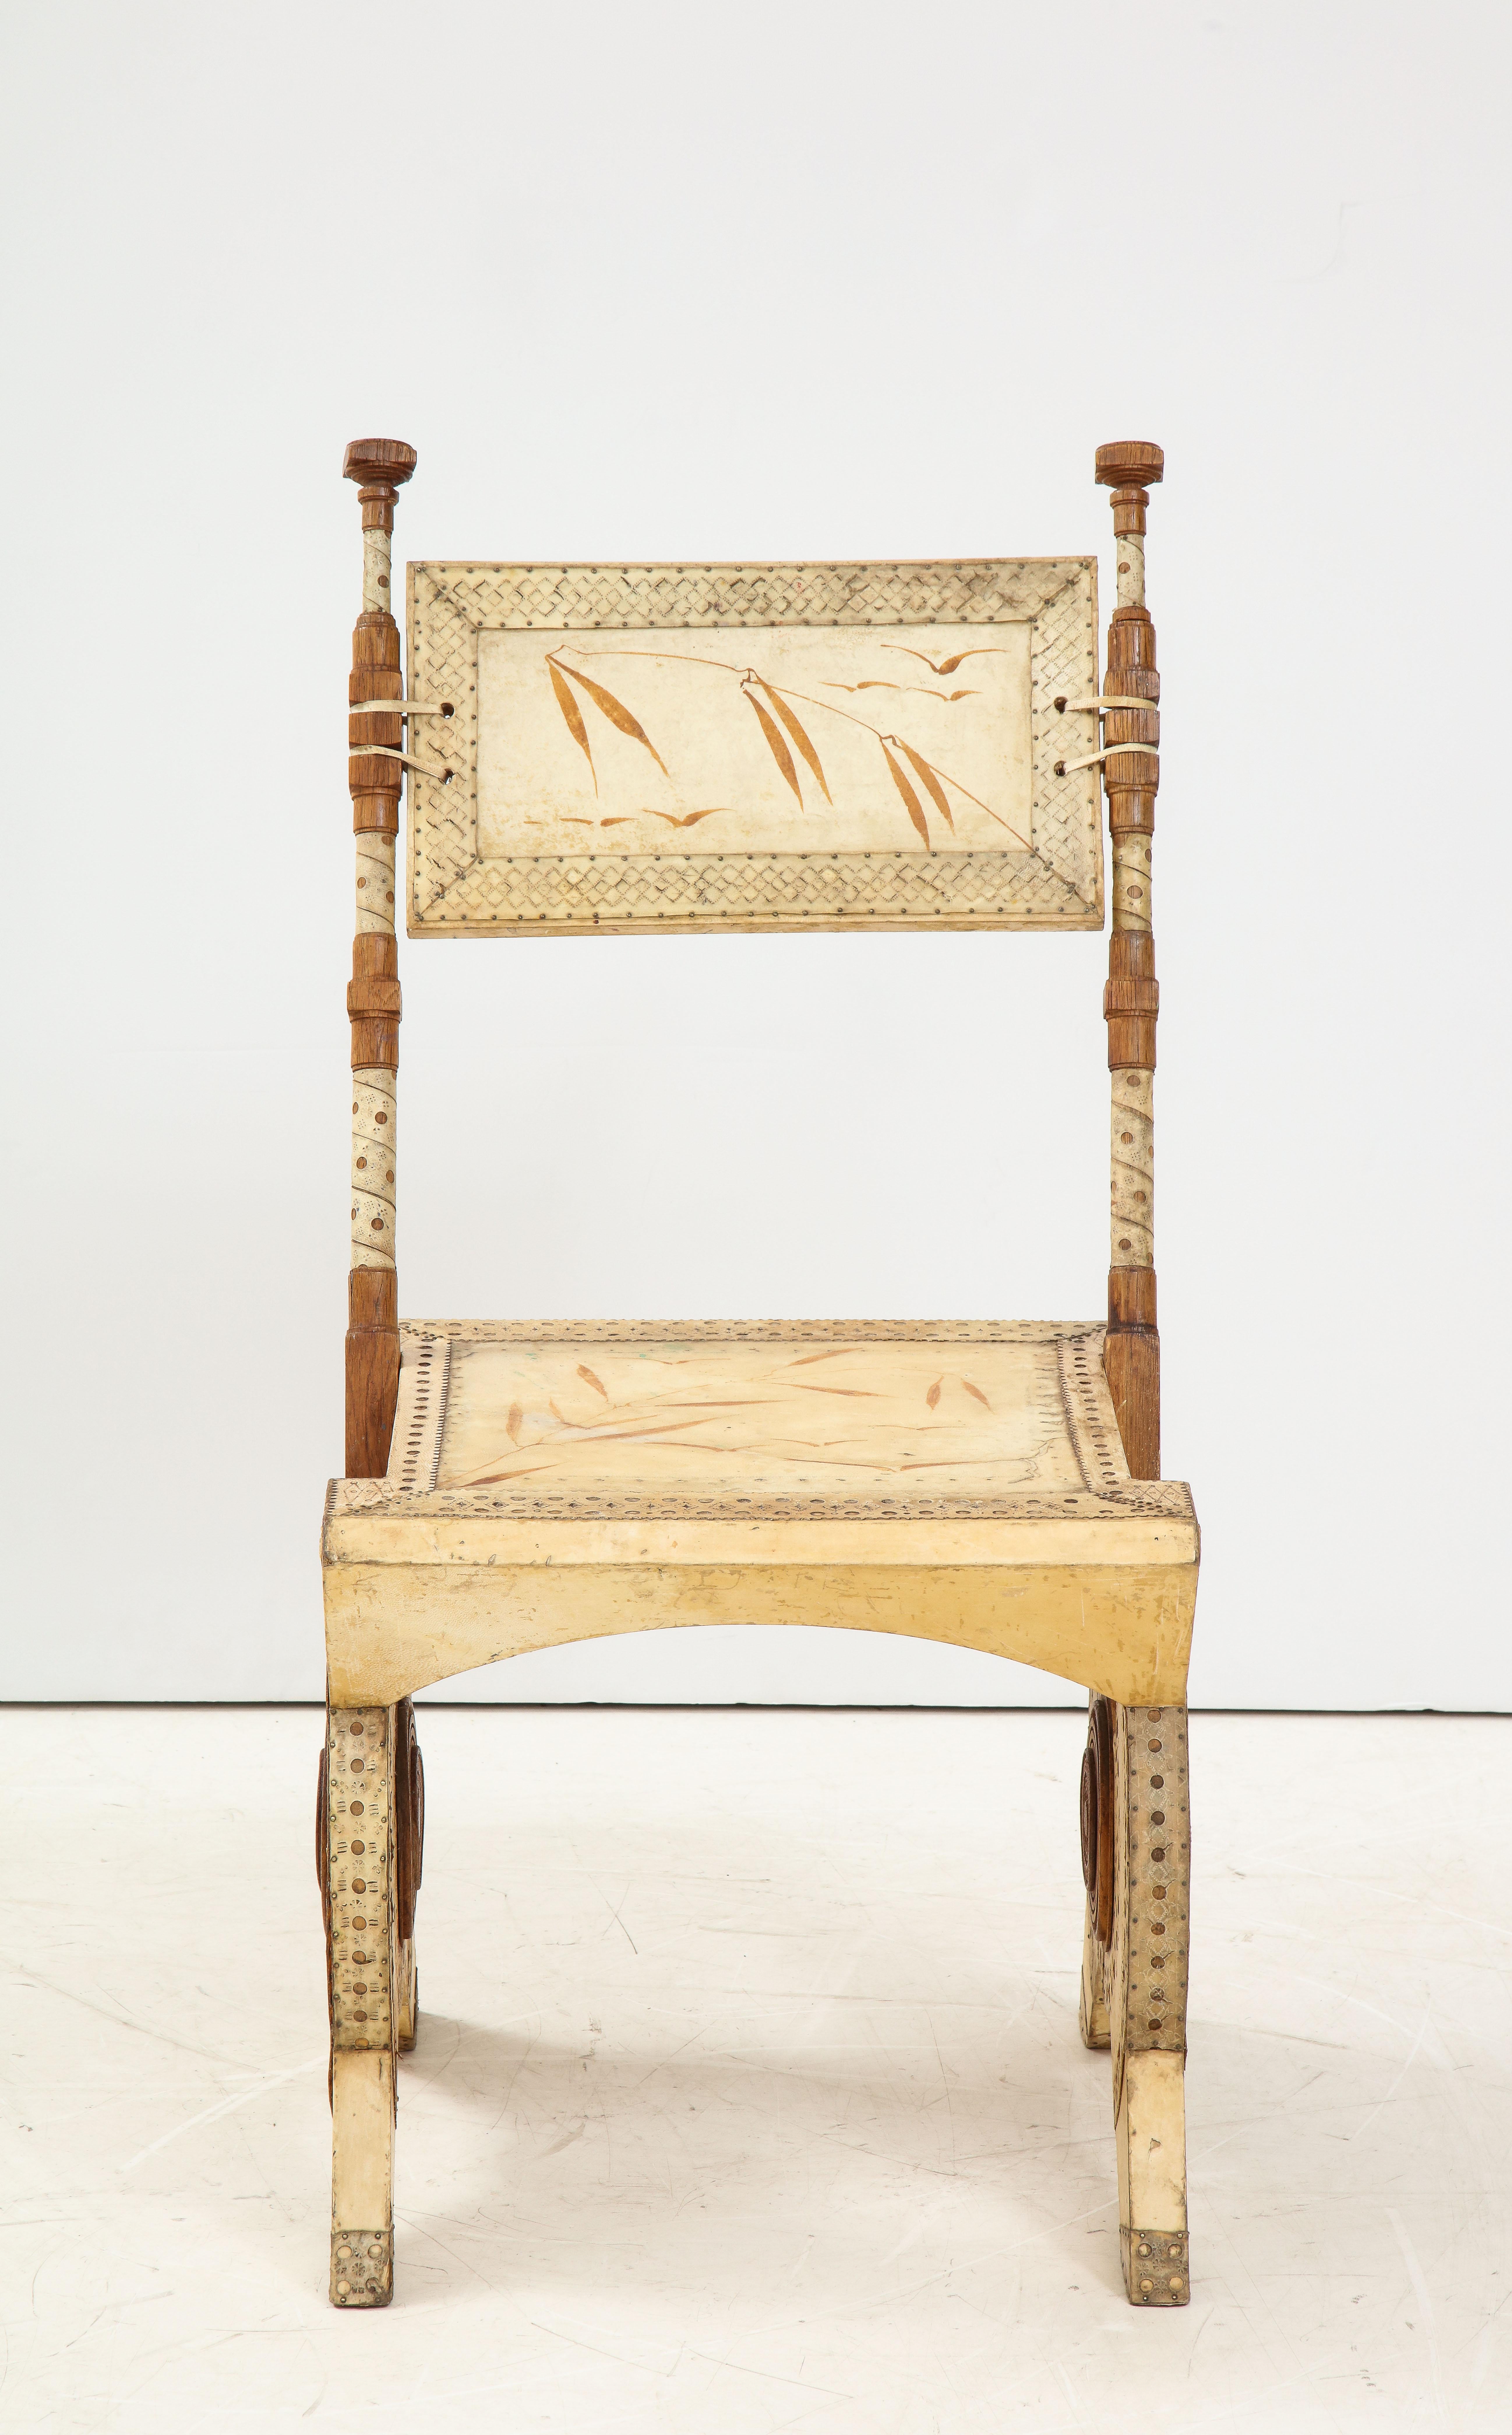 Rare oak and parchment chair by Carlo Bugatti han painted with birds and leaves motifs. 
Marked to underside ‘Mobili Brevettat Bugatti. Italy: circa 1904
Carlo Bugatti was a famous designer active at the turn of the century. His pieces are rare